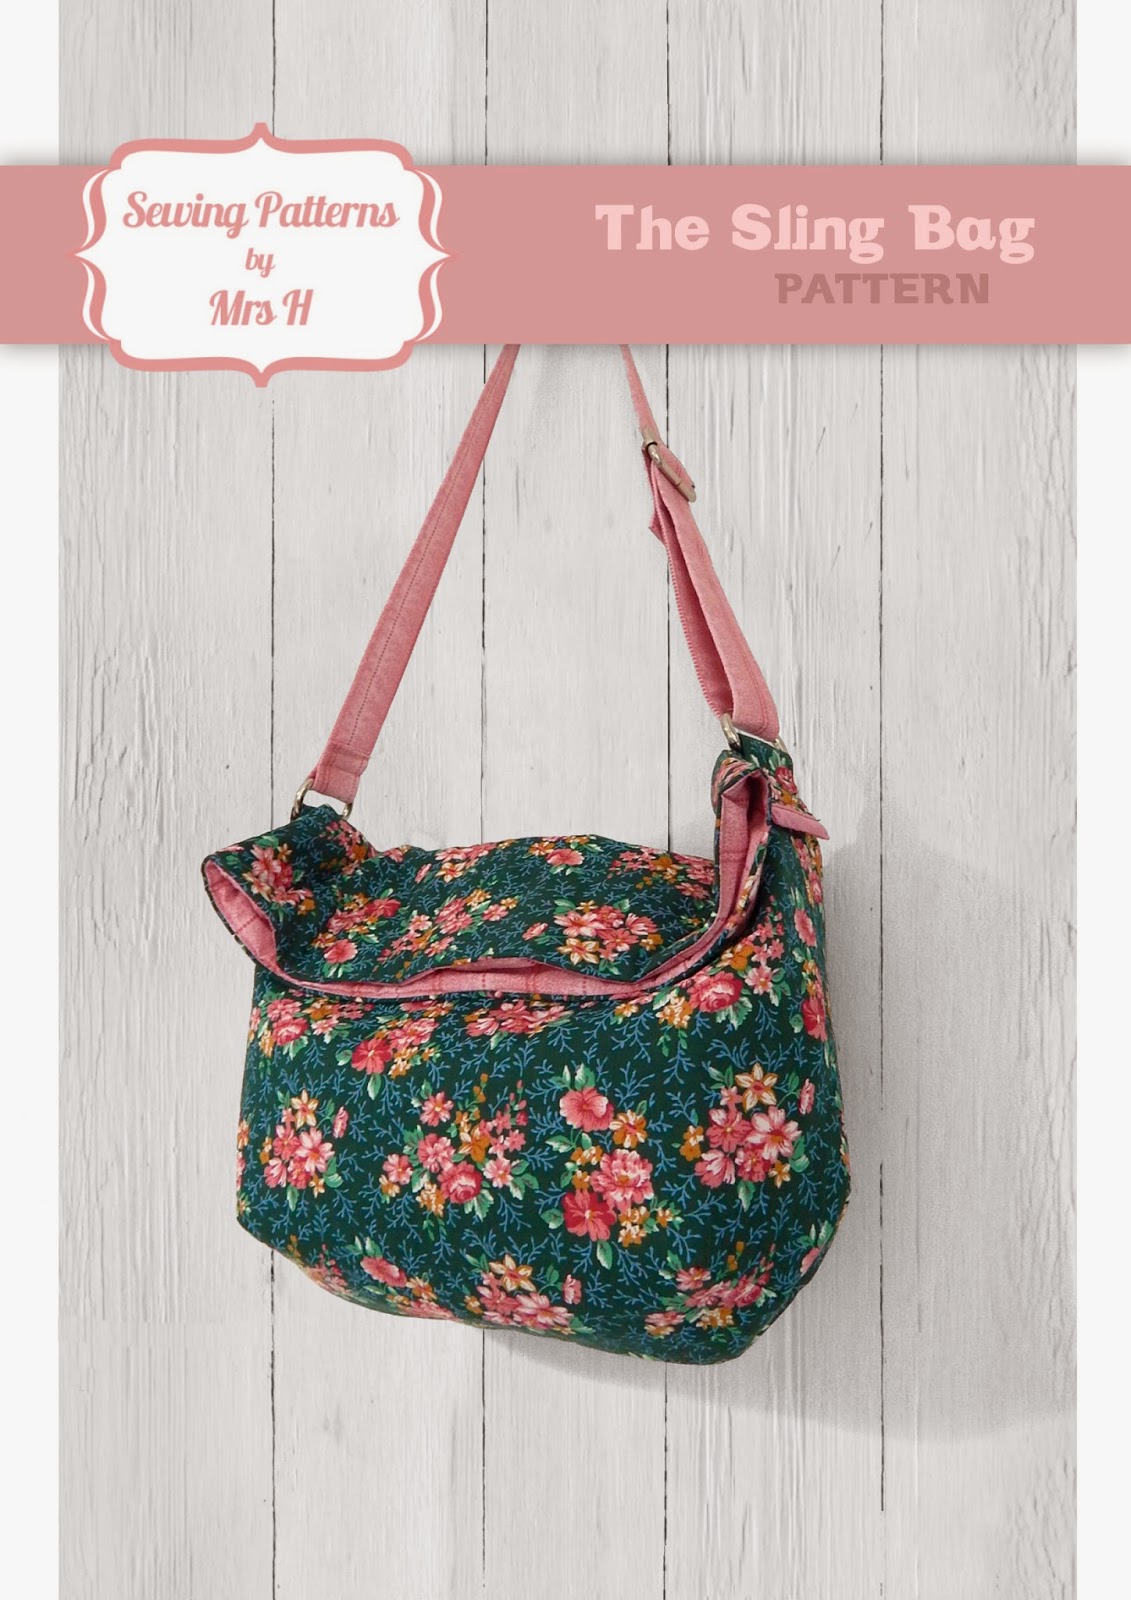 Mrs H - the blog: The Super Simple Slouchy Sling Bag